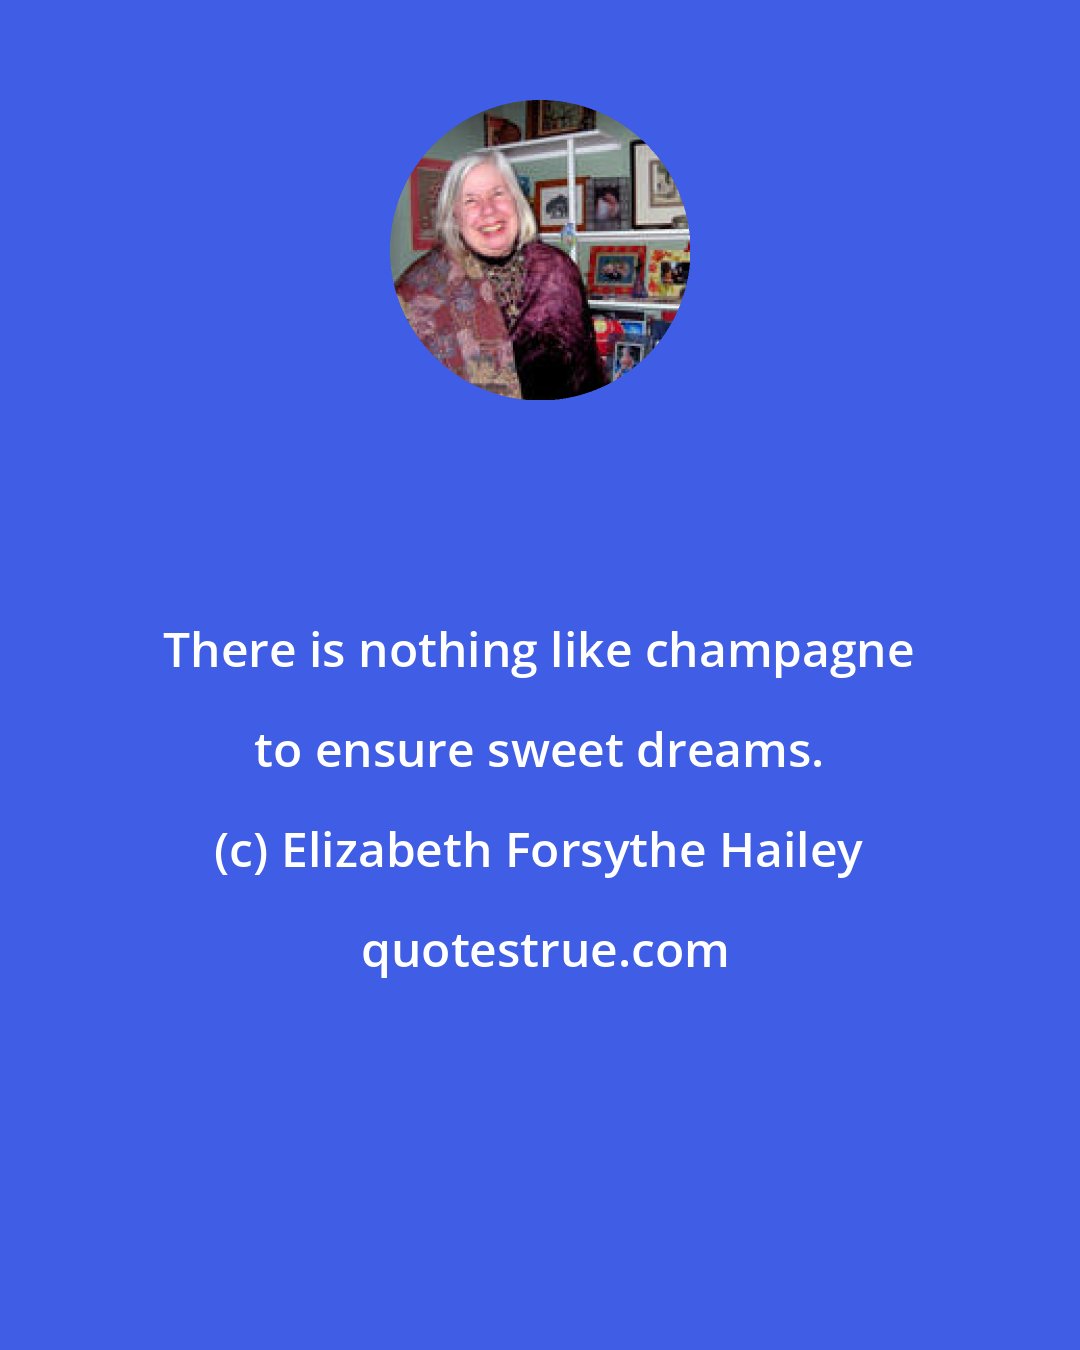 Elizabeth Forsythe Hailey: There is nothing like champagne to ensure sweet dreams.